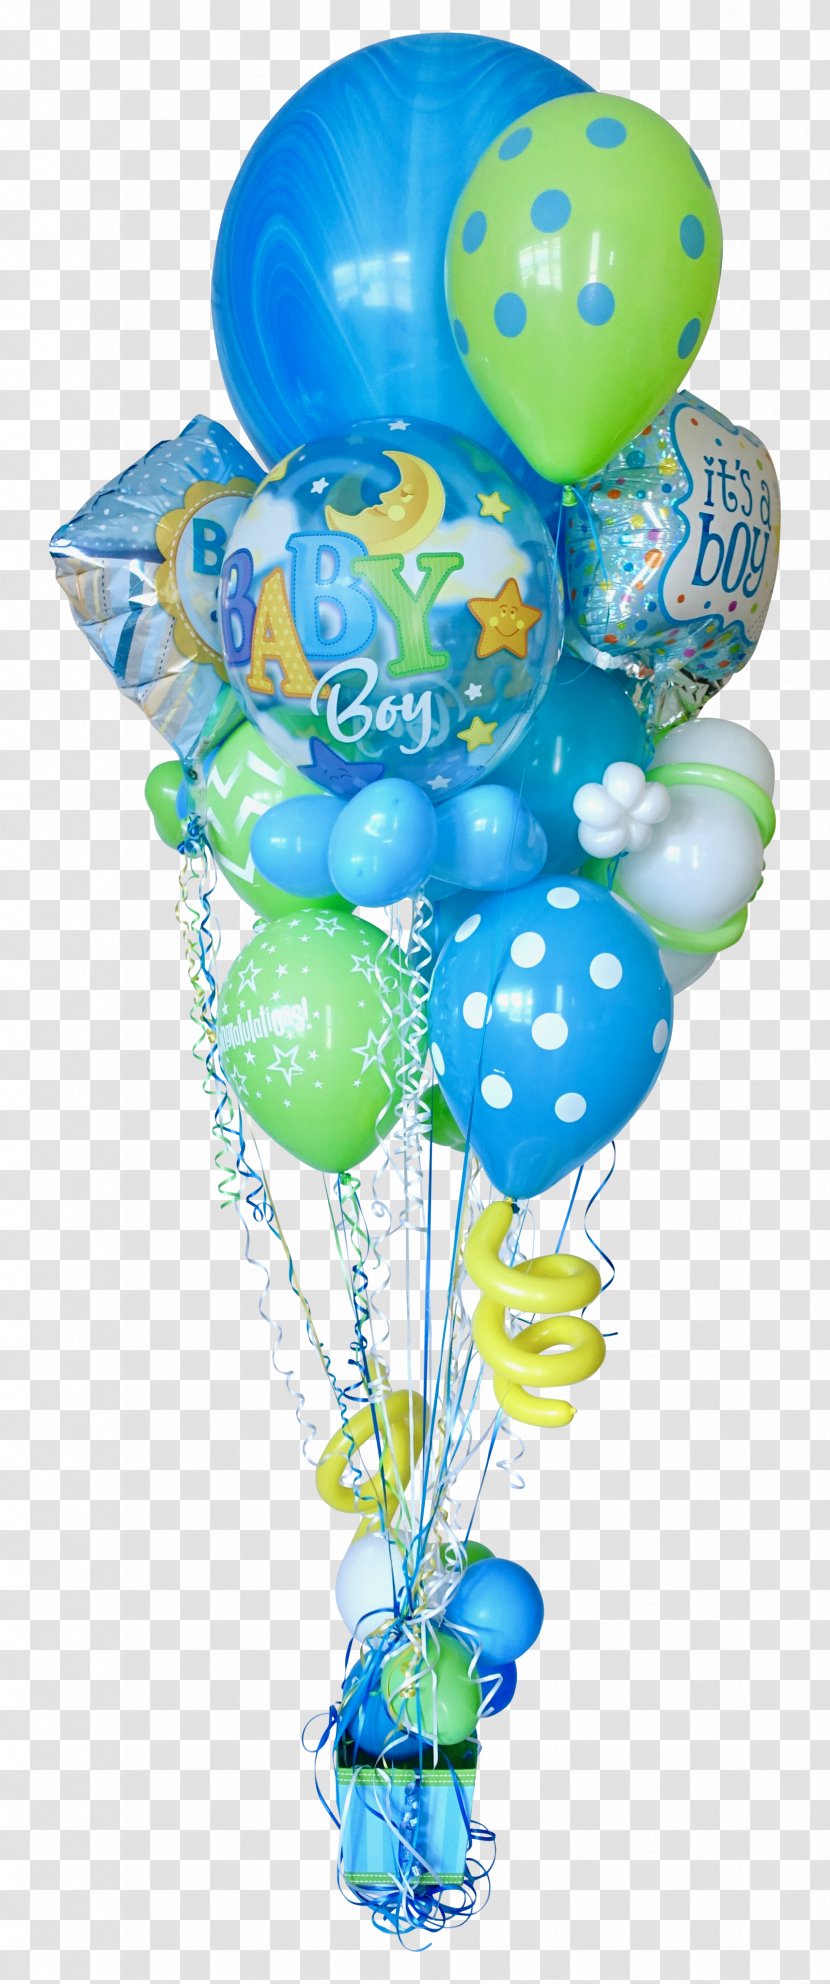 Toy Balloon Microsoft Azure Turquoise Party - Its A Boy Transparent PNG